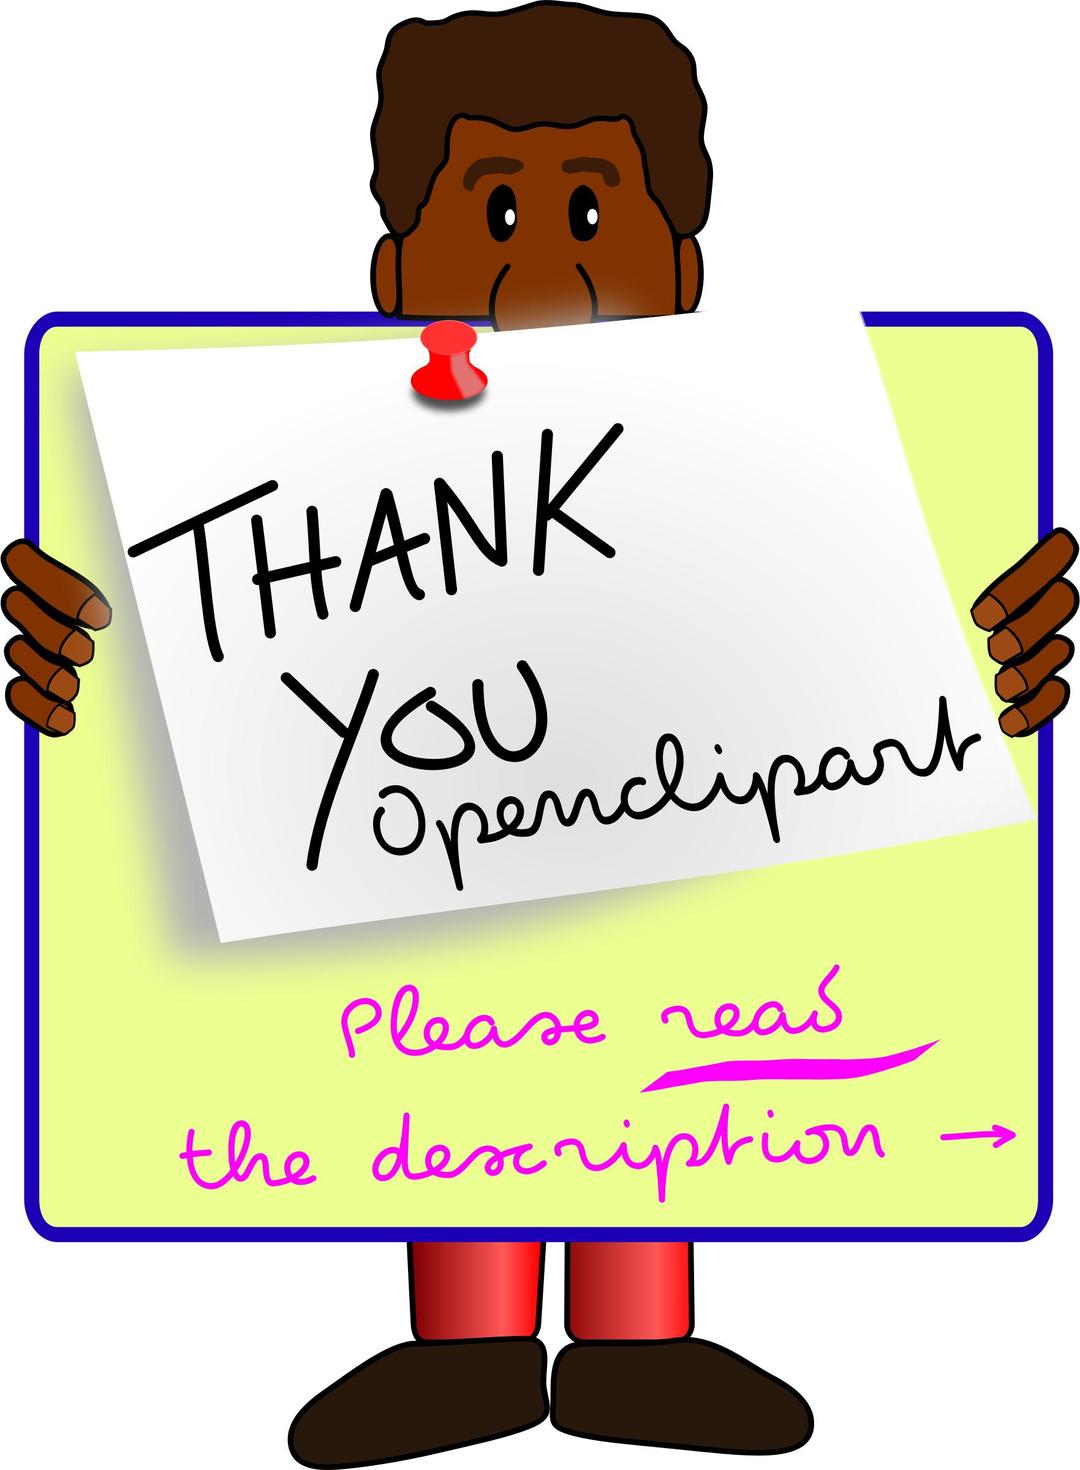 The G?G?-team is saying thank you to Openclipart png transparent